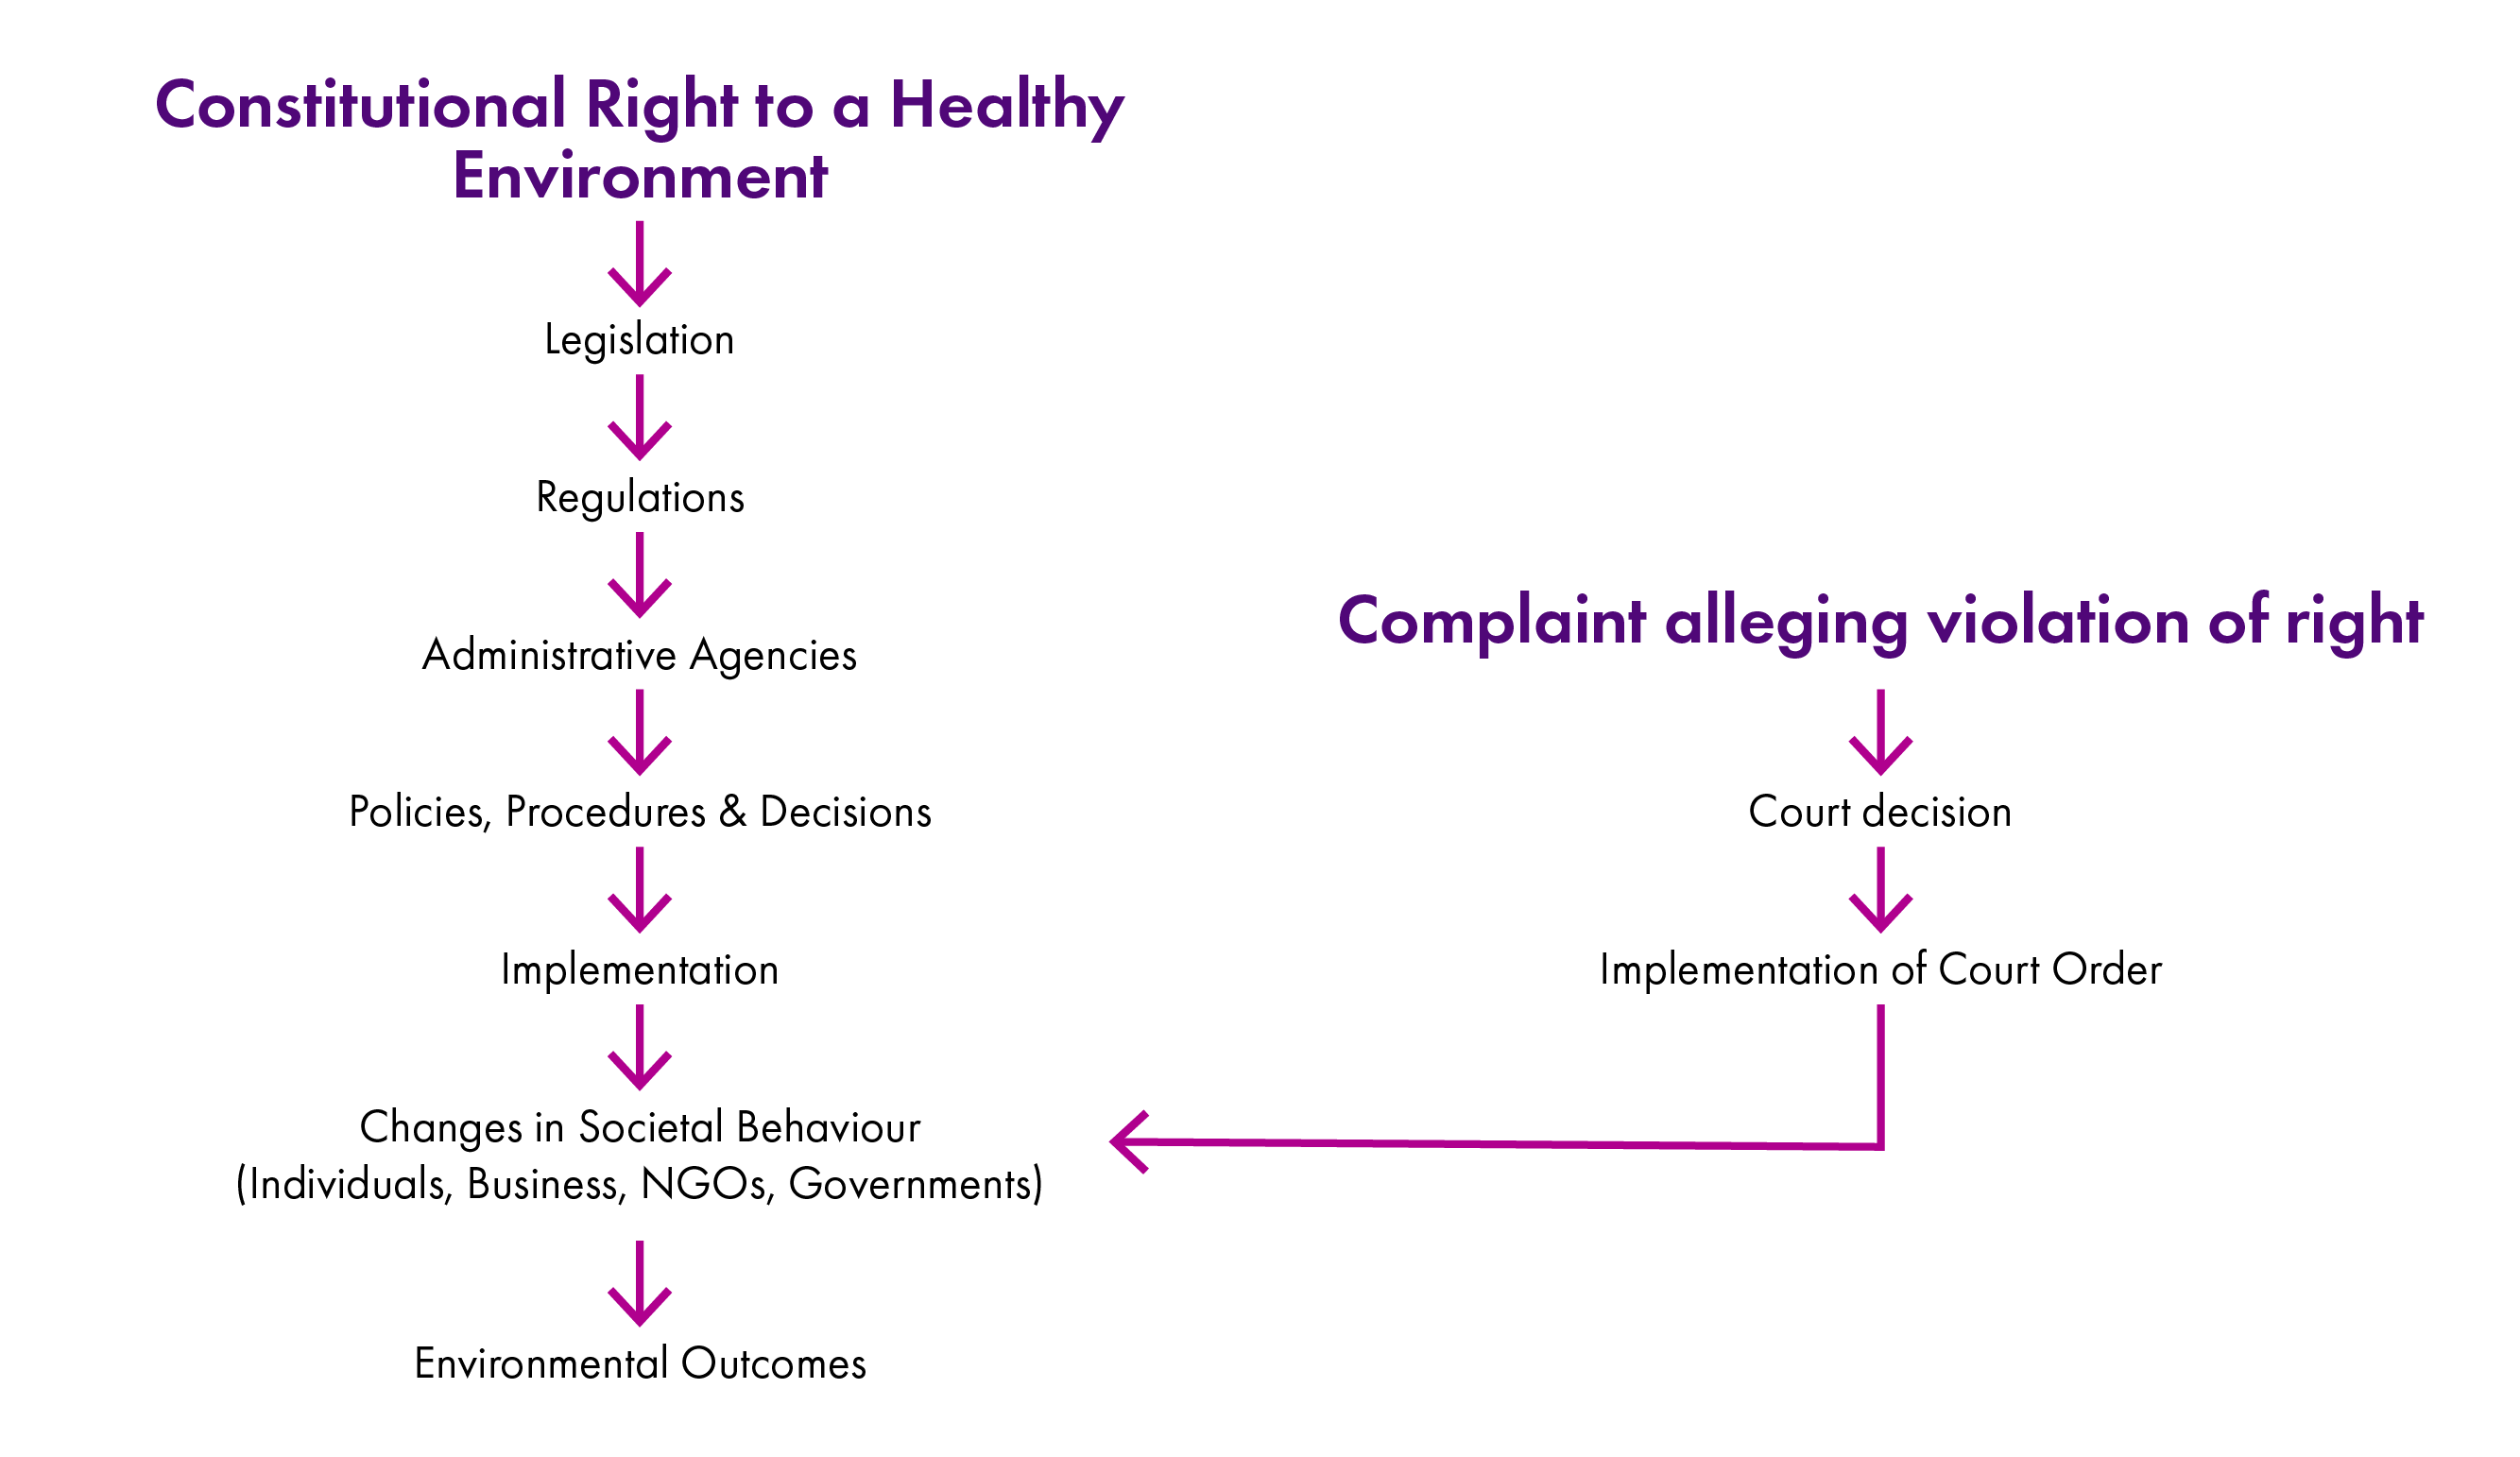 Flowchart detailing sequence of events from a constitutional environmental right to environmental outcomes.